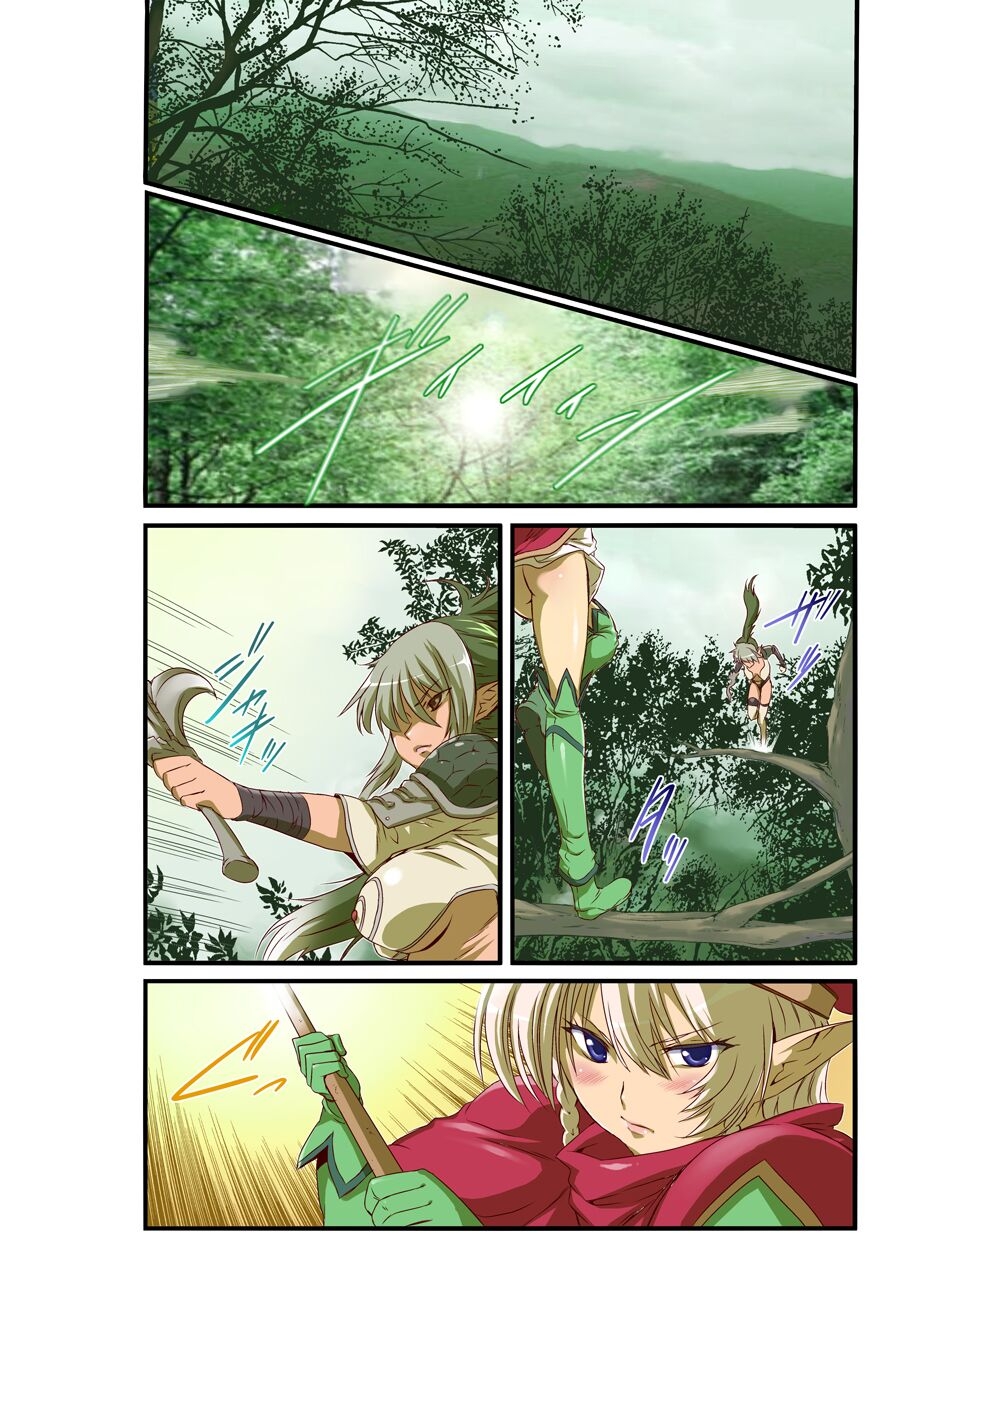 [Utsuro na Hitomi] Queen's *lade Mind-control Manga (Queen's Blade) [chinese] [lalala1234个人机翻汉化] 8